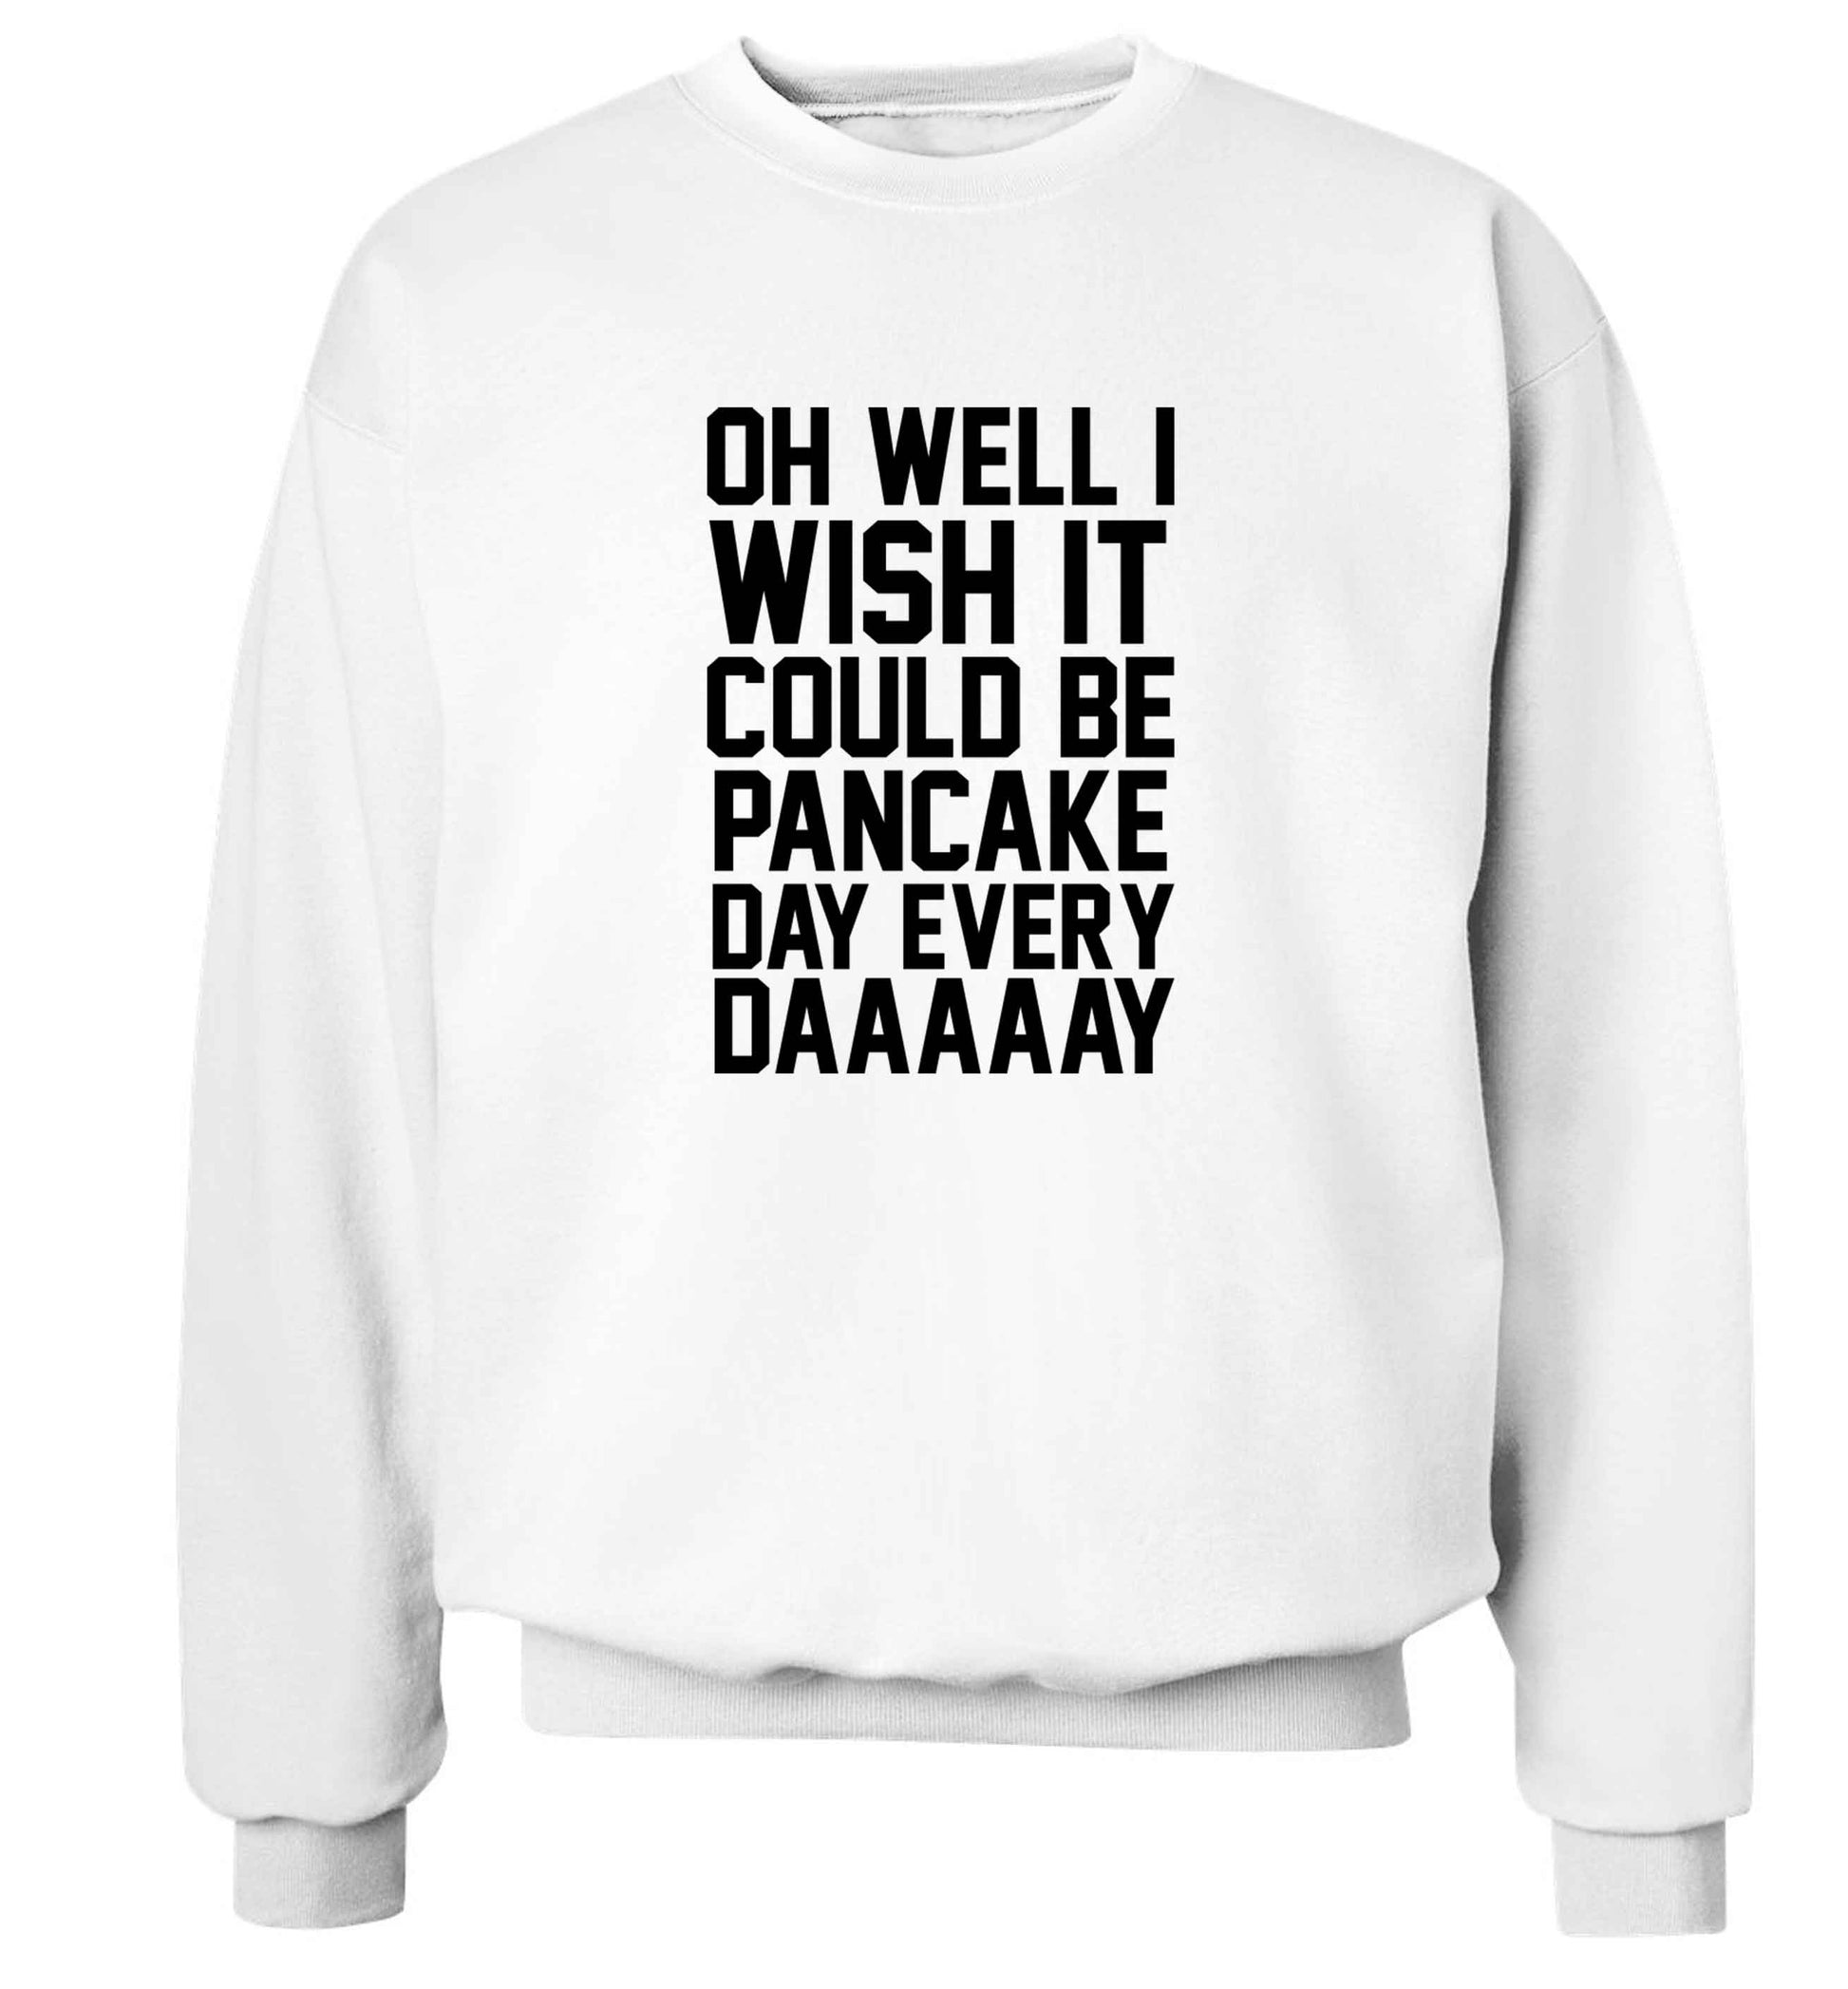 Oh well I wish it could be pancake day every day adult's unisex white sweater 2XL